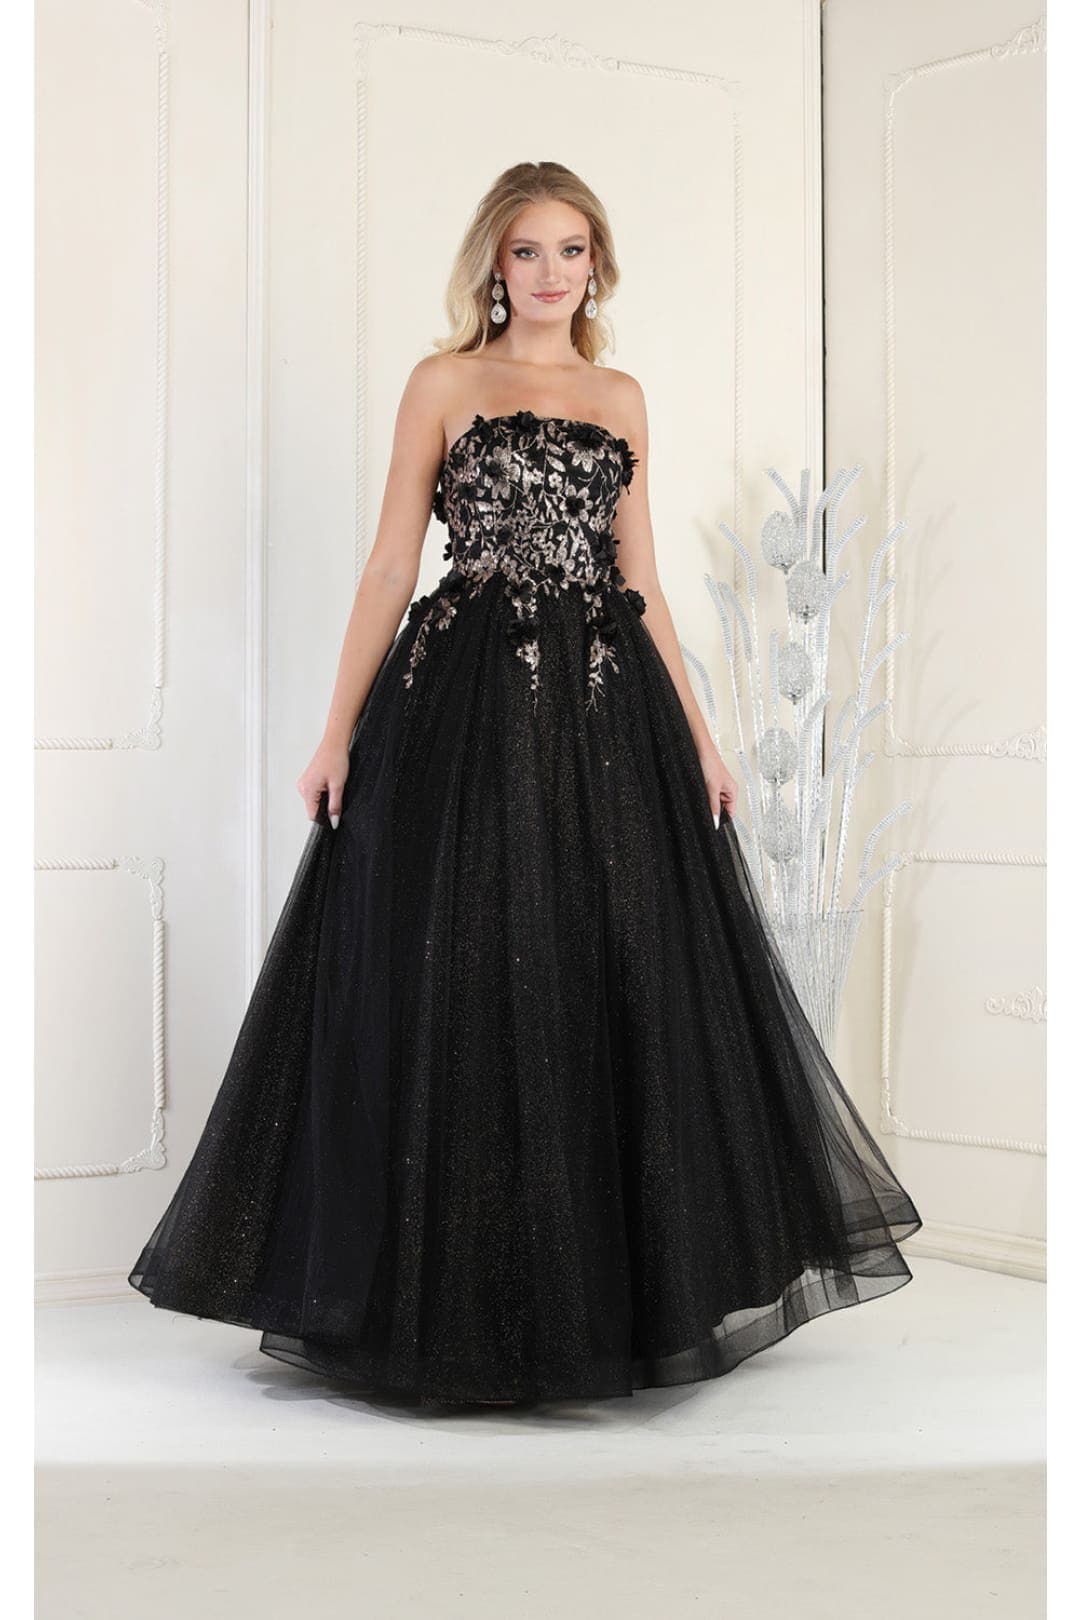 Elegant Pageant Dresses, Long Formal Evening Gowns